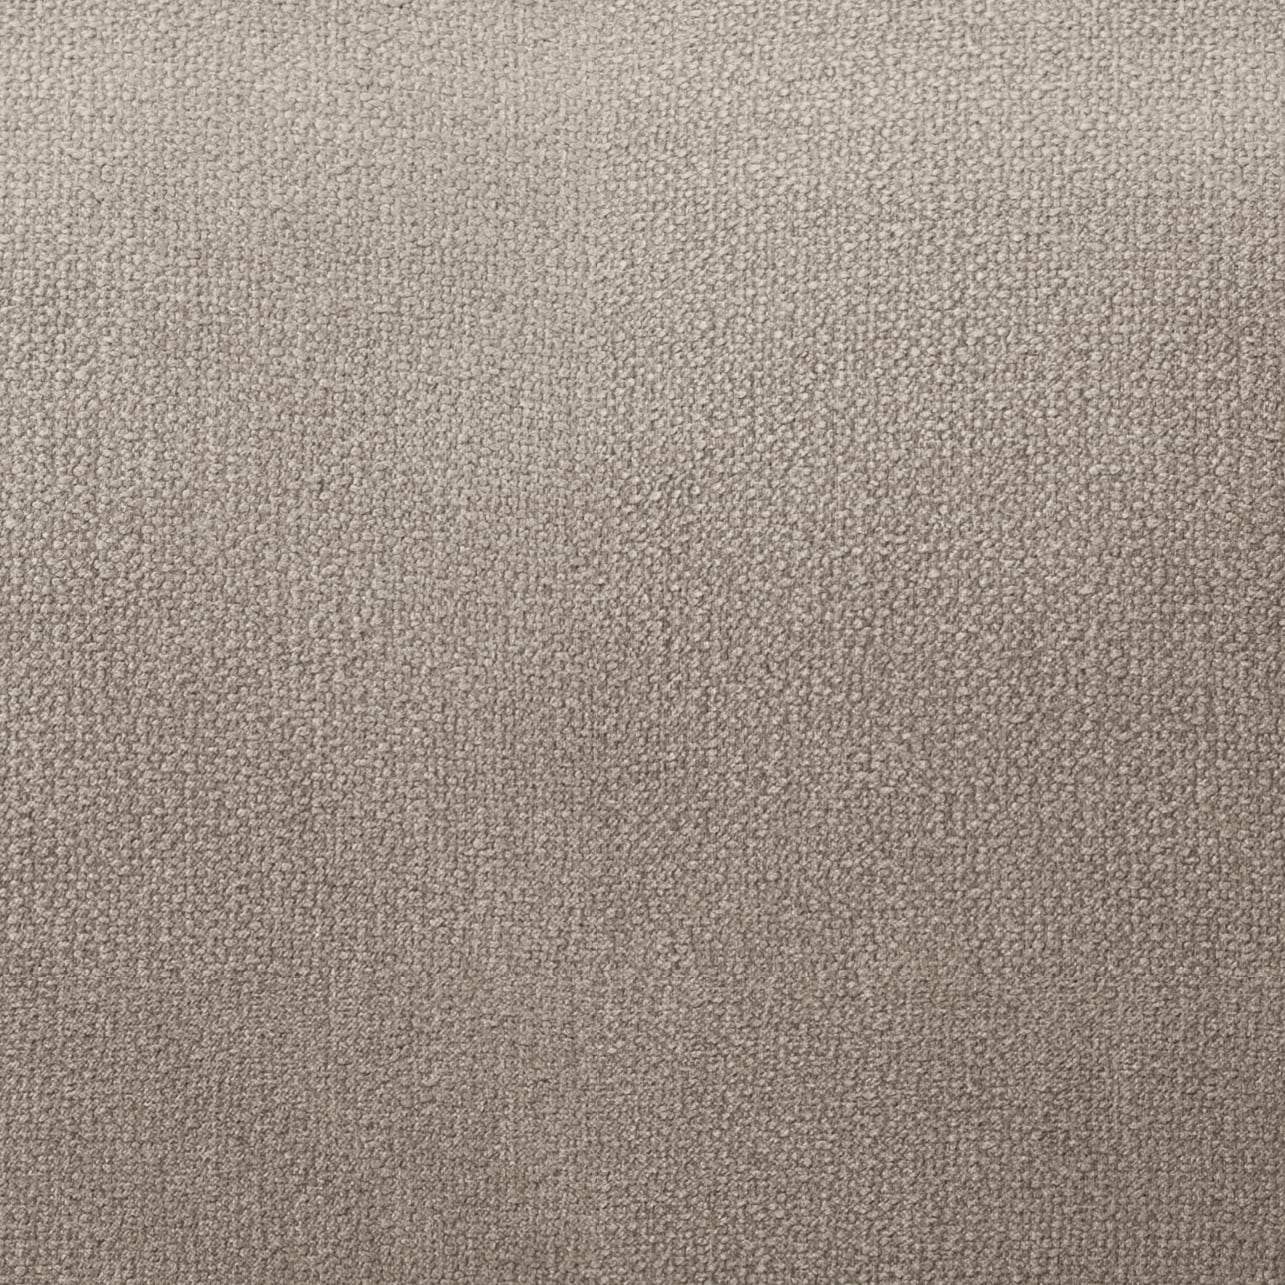 Sand bouclé upholstery fabric made to order for Ferm Livings Rico sofa series. Order your free fabric swatches at someday designs. 